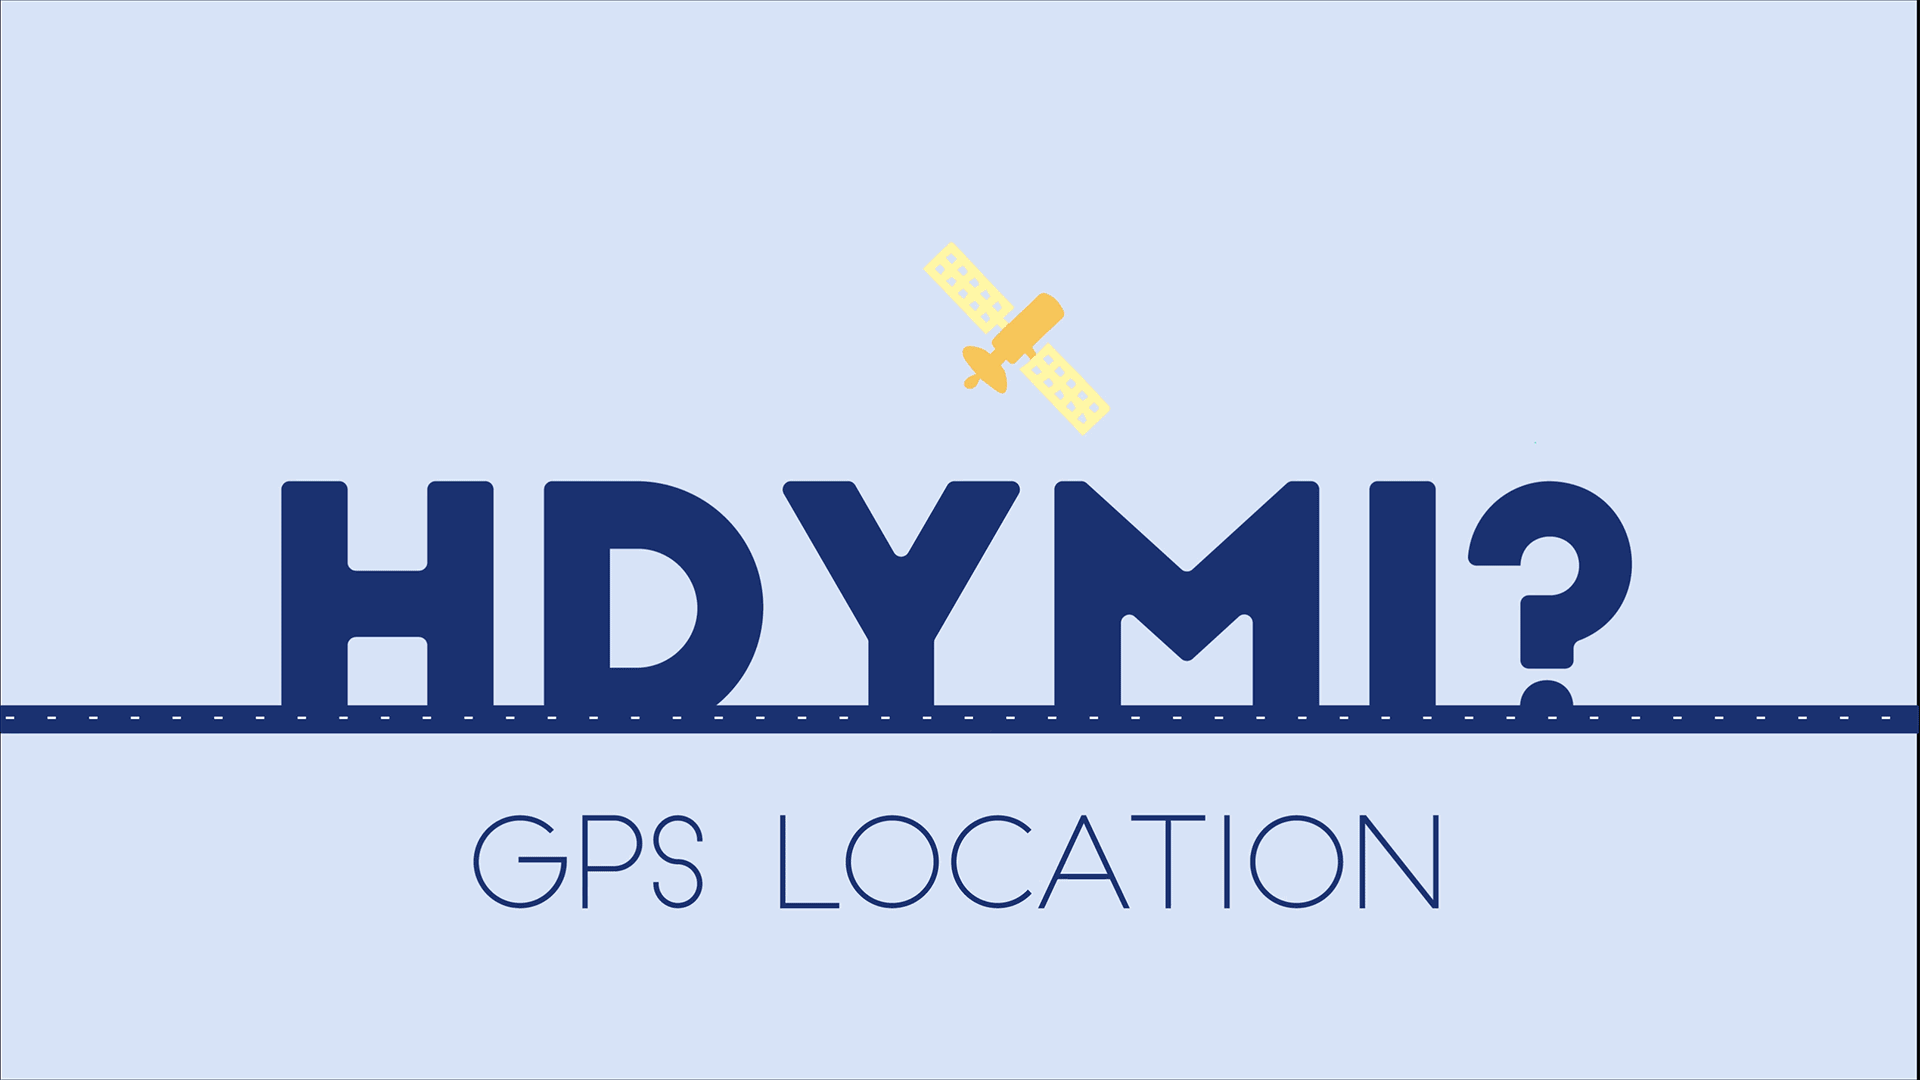 How Do You Measure Your Location Using GPS? | NIST